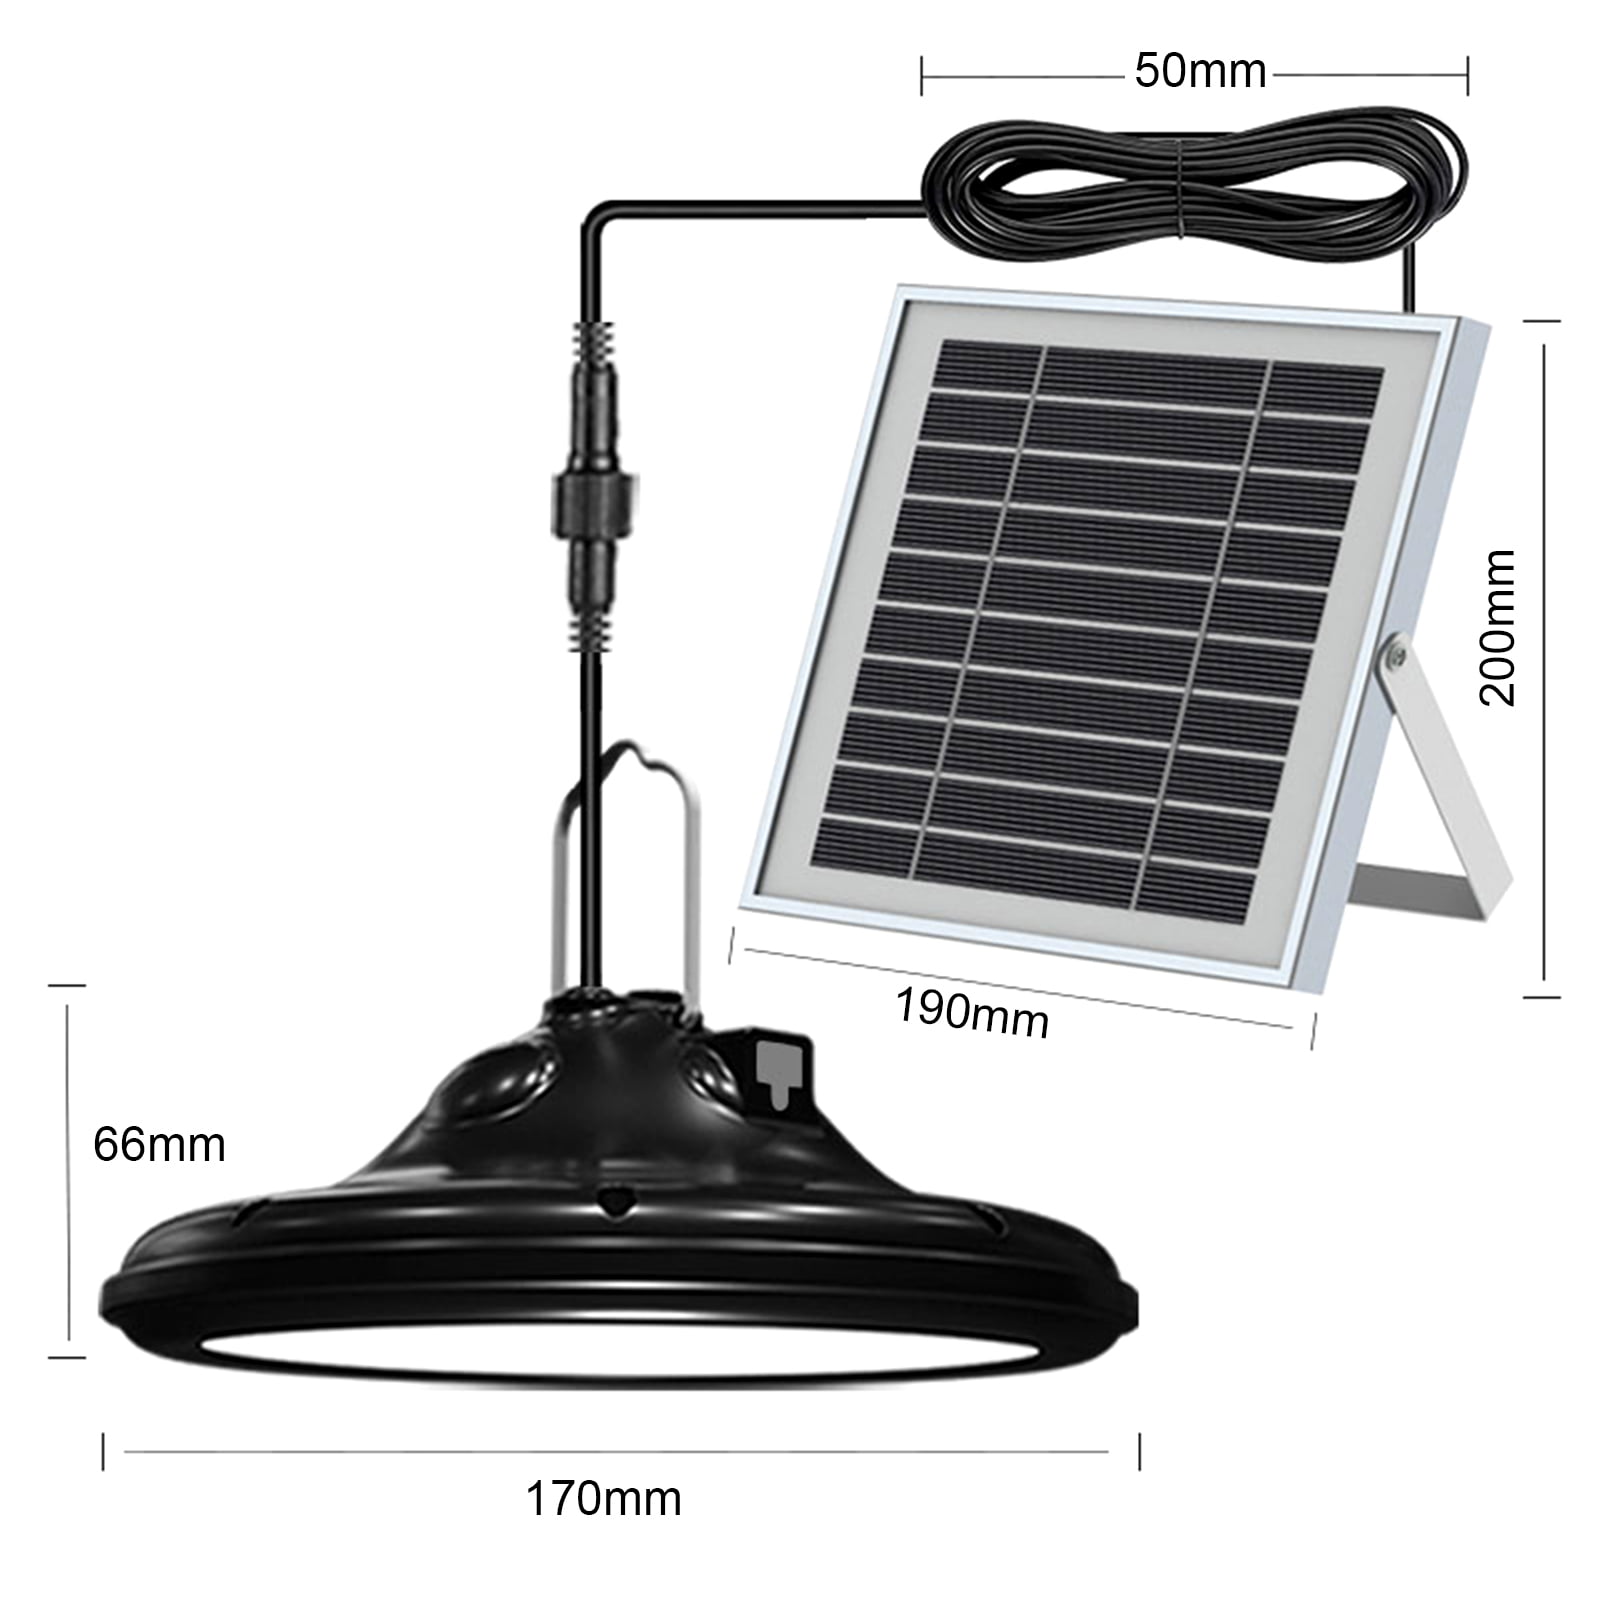 Neoglint Solar Pendant Light Outdoor IP66 Waterproof Solar Lights Dimmable 3 Color with Remote Control Shed Light for Patio Porch Balcony Barn Walmart.com